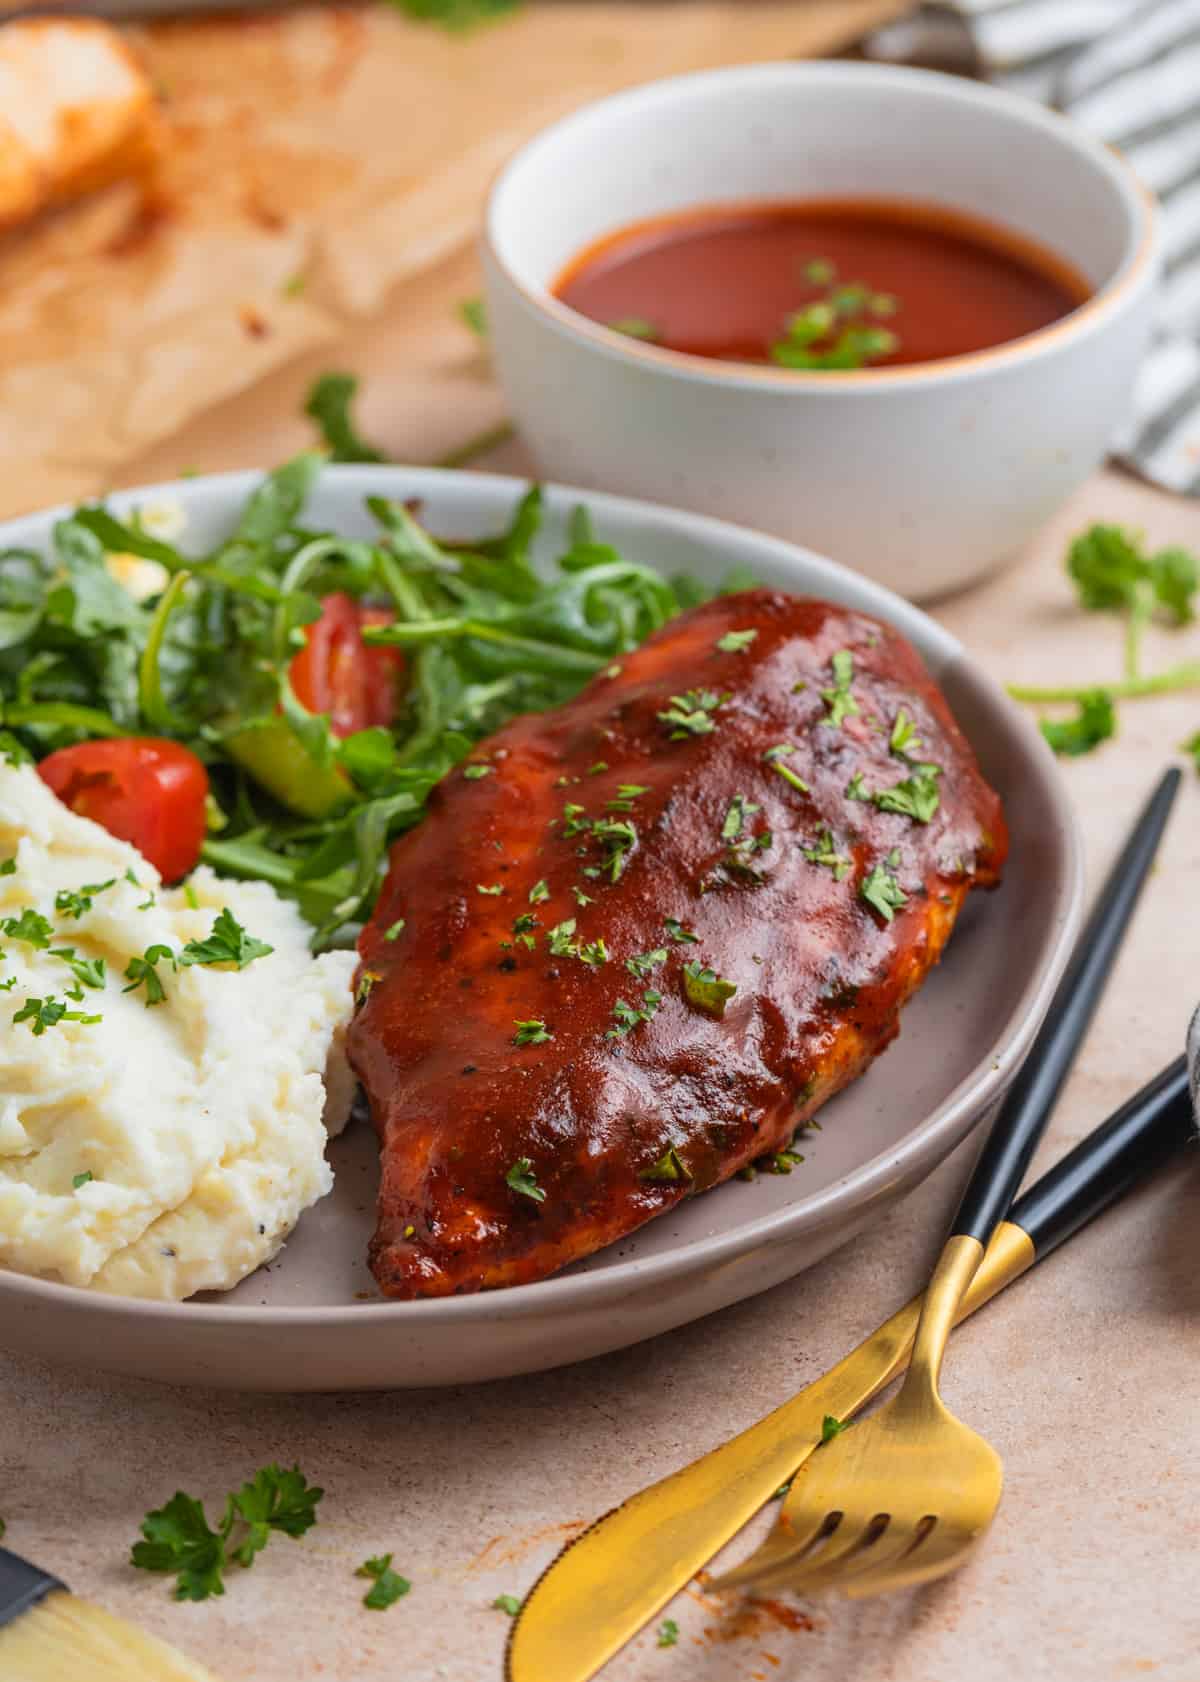 Plate with mashed potatoes, salad and BBQ chicken with fork and knife beside it.